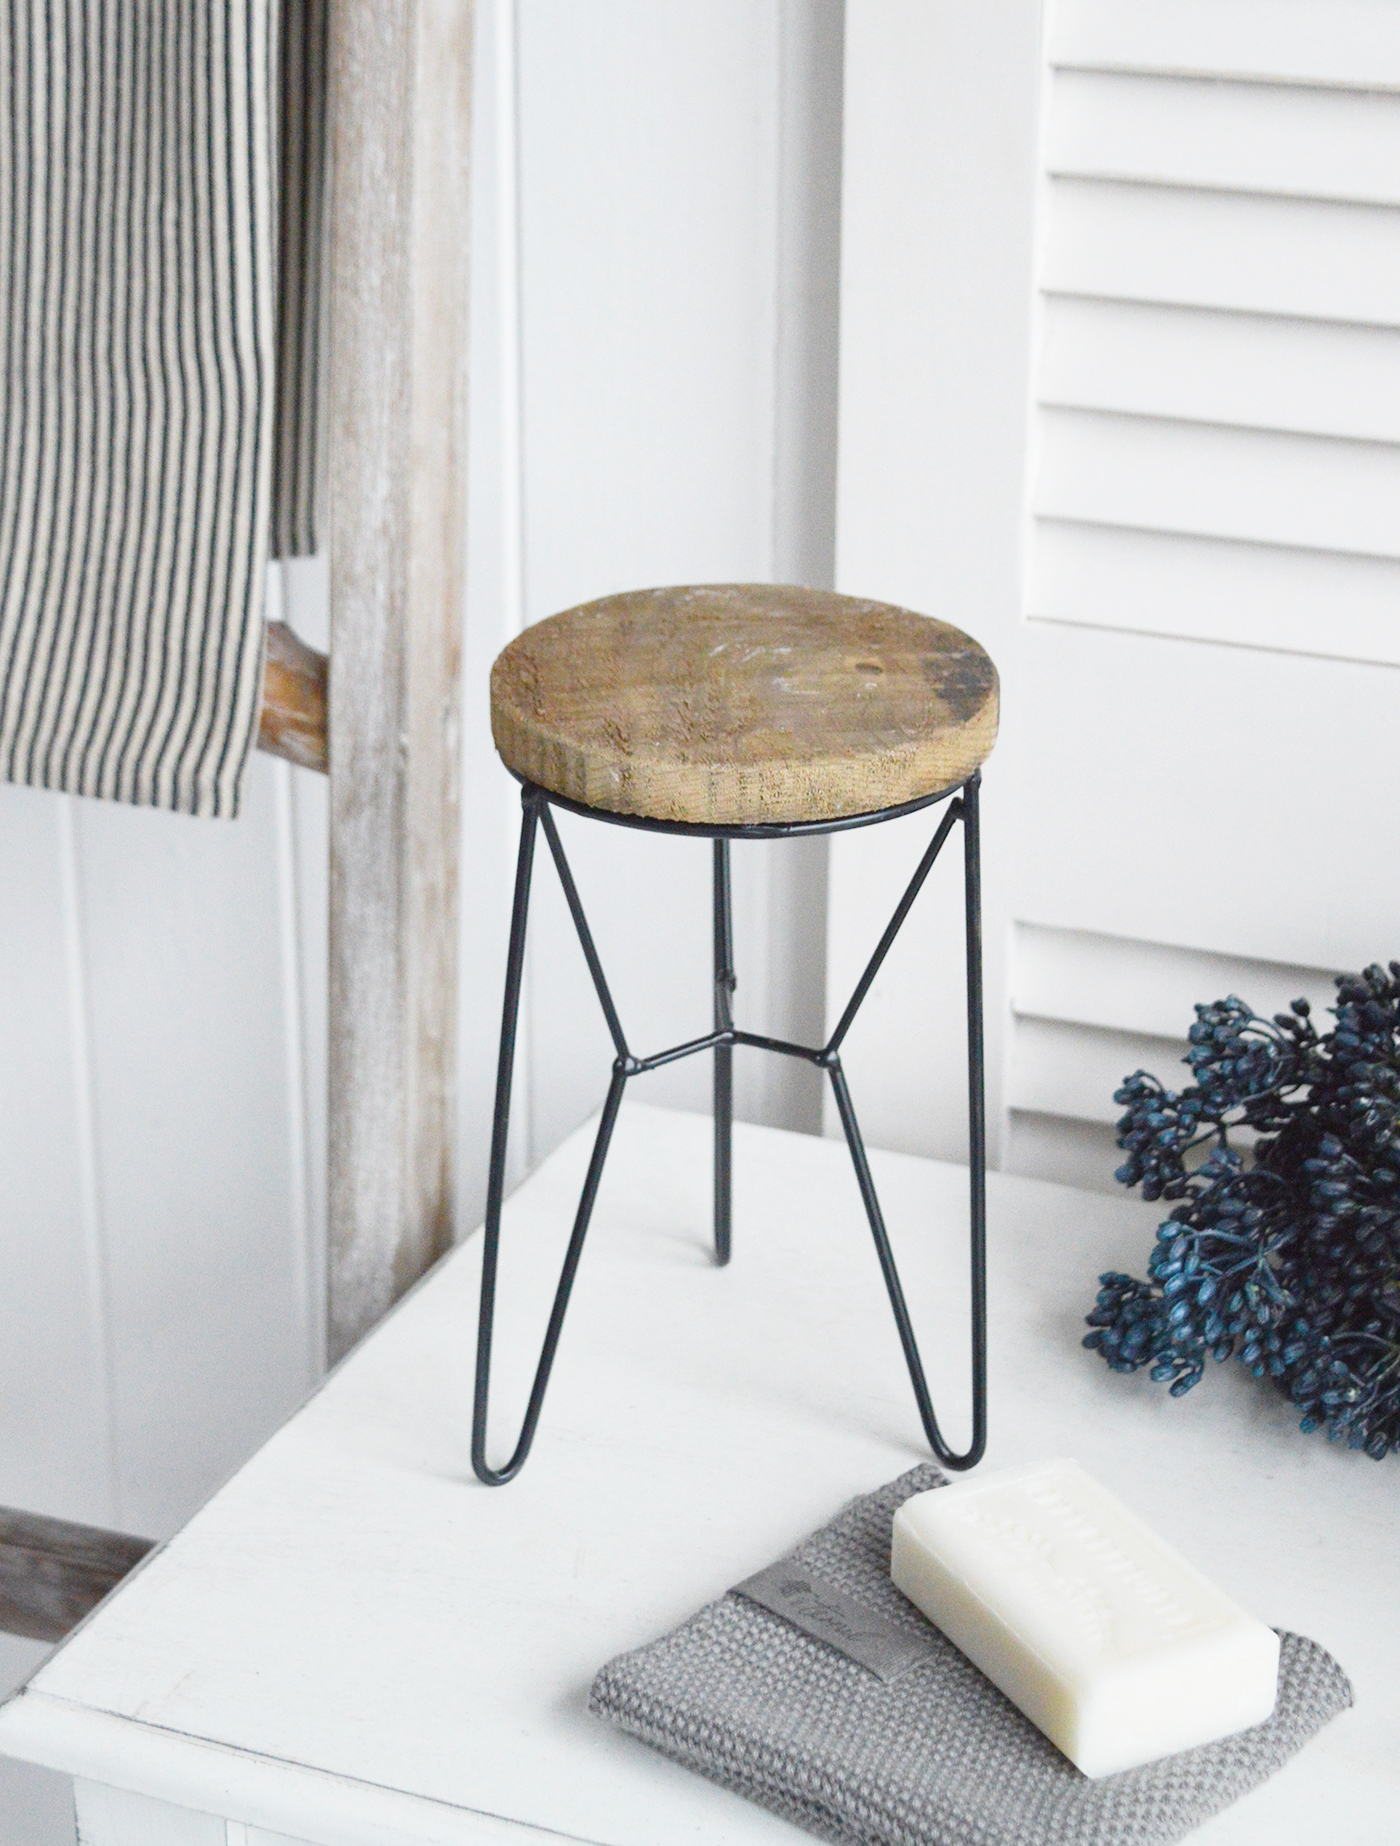 Peabody iron and rustic wooden decorative stool. Ideal for the living room or bathroom as a small side table or plant table in a New England styled home by the sea or in the country